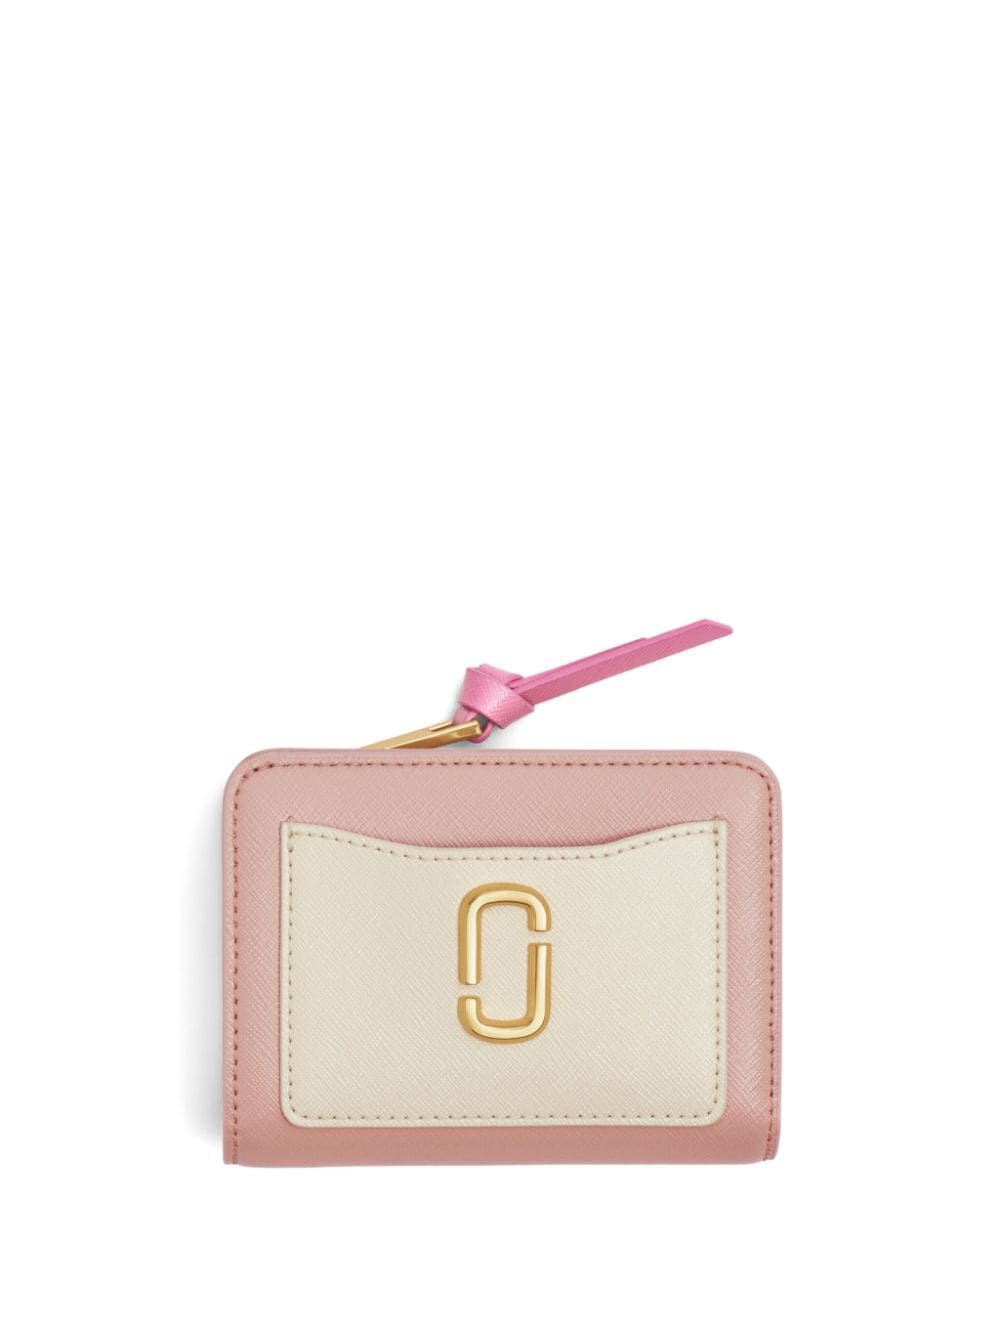 Marc Jacobs The Mini Utility Snapshot compact wallet - Pink von Marc Jacobs